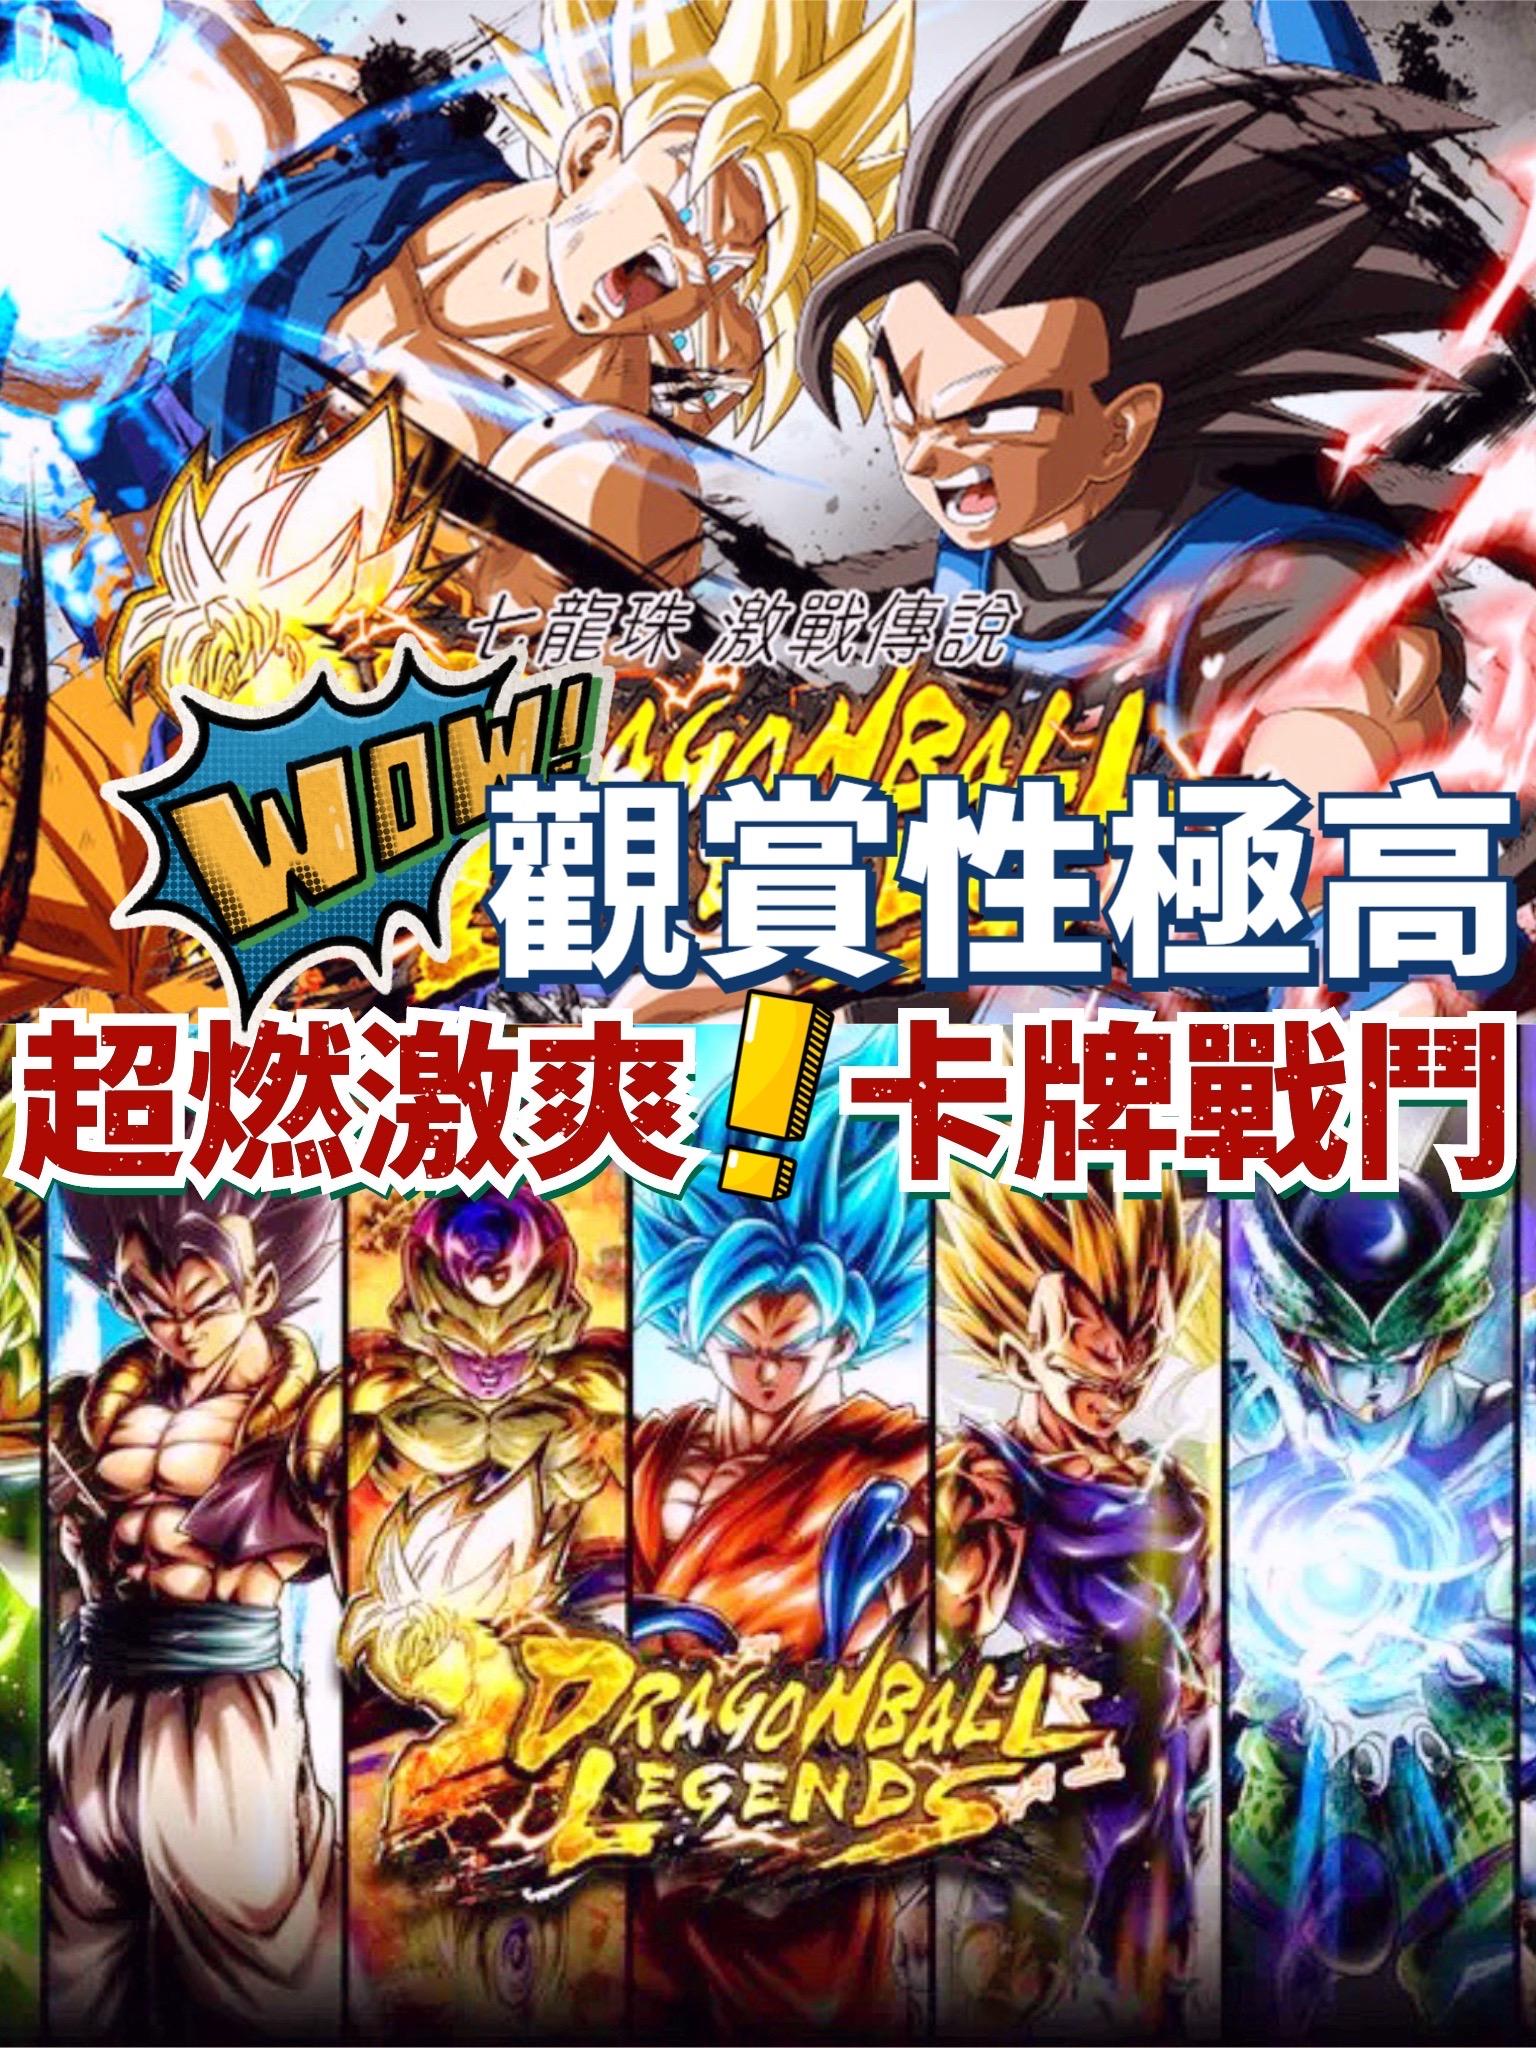 HERO Tag List, Characters, Dragon Ball Legends